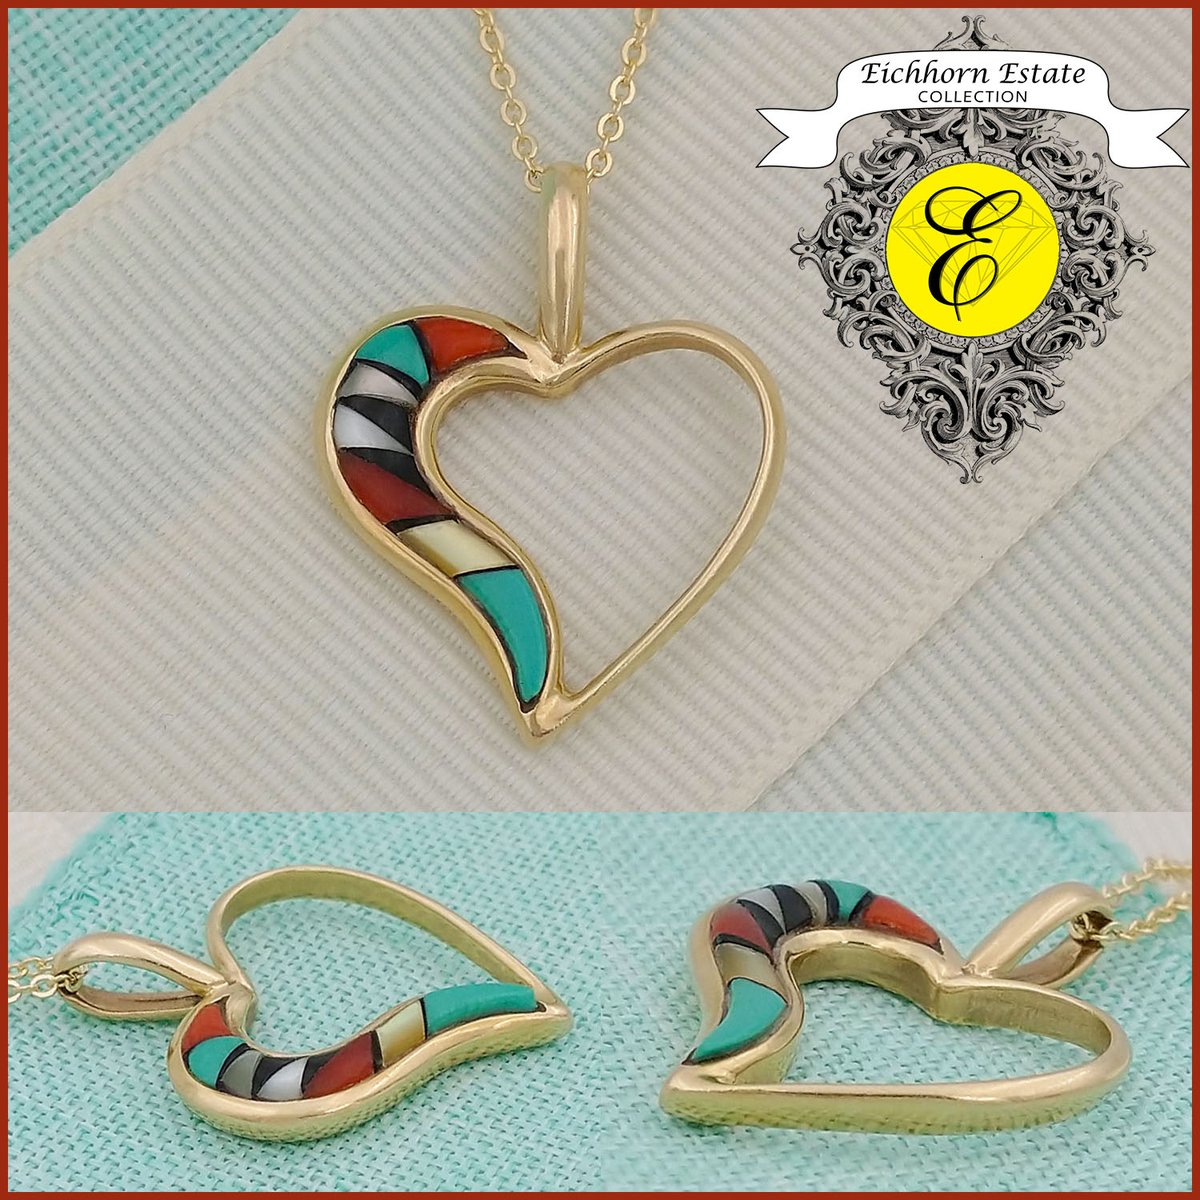 To Mom, with LOVE. 14K yellow gold Pendant with Inlay of Turquoise, Coral, and Mother-of-Pearl. From Our Estate Collection $350. Chain sold separately. eichhornjewelry.com/estate-collect… #estatejewelry #turquoisejewelry #coraljewelry #motherofpearljewelry #14kgoldjewelry